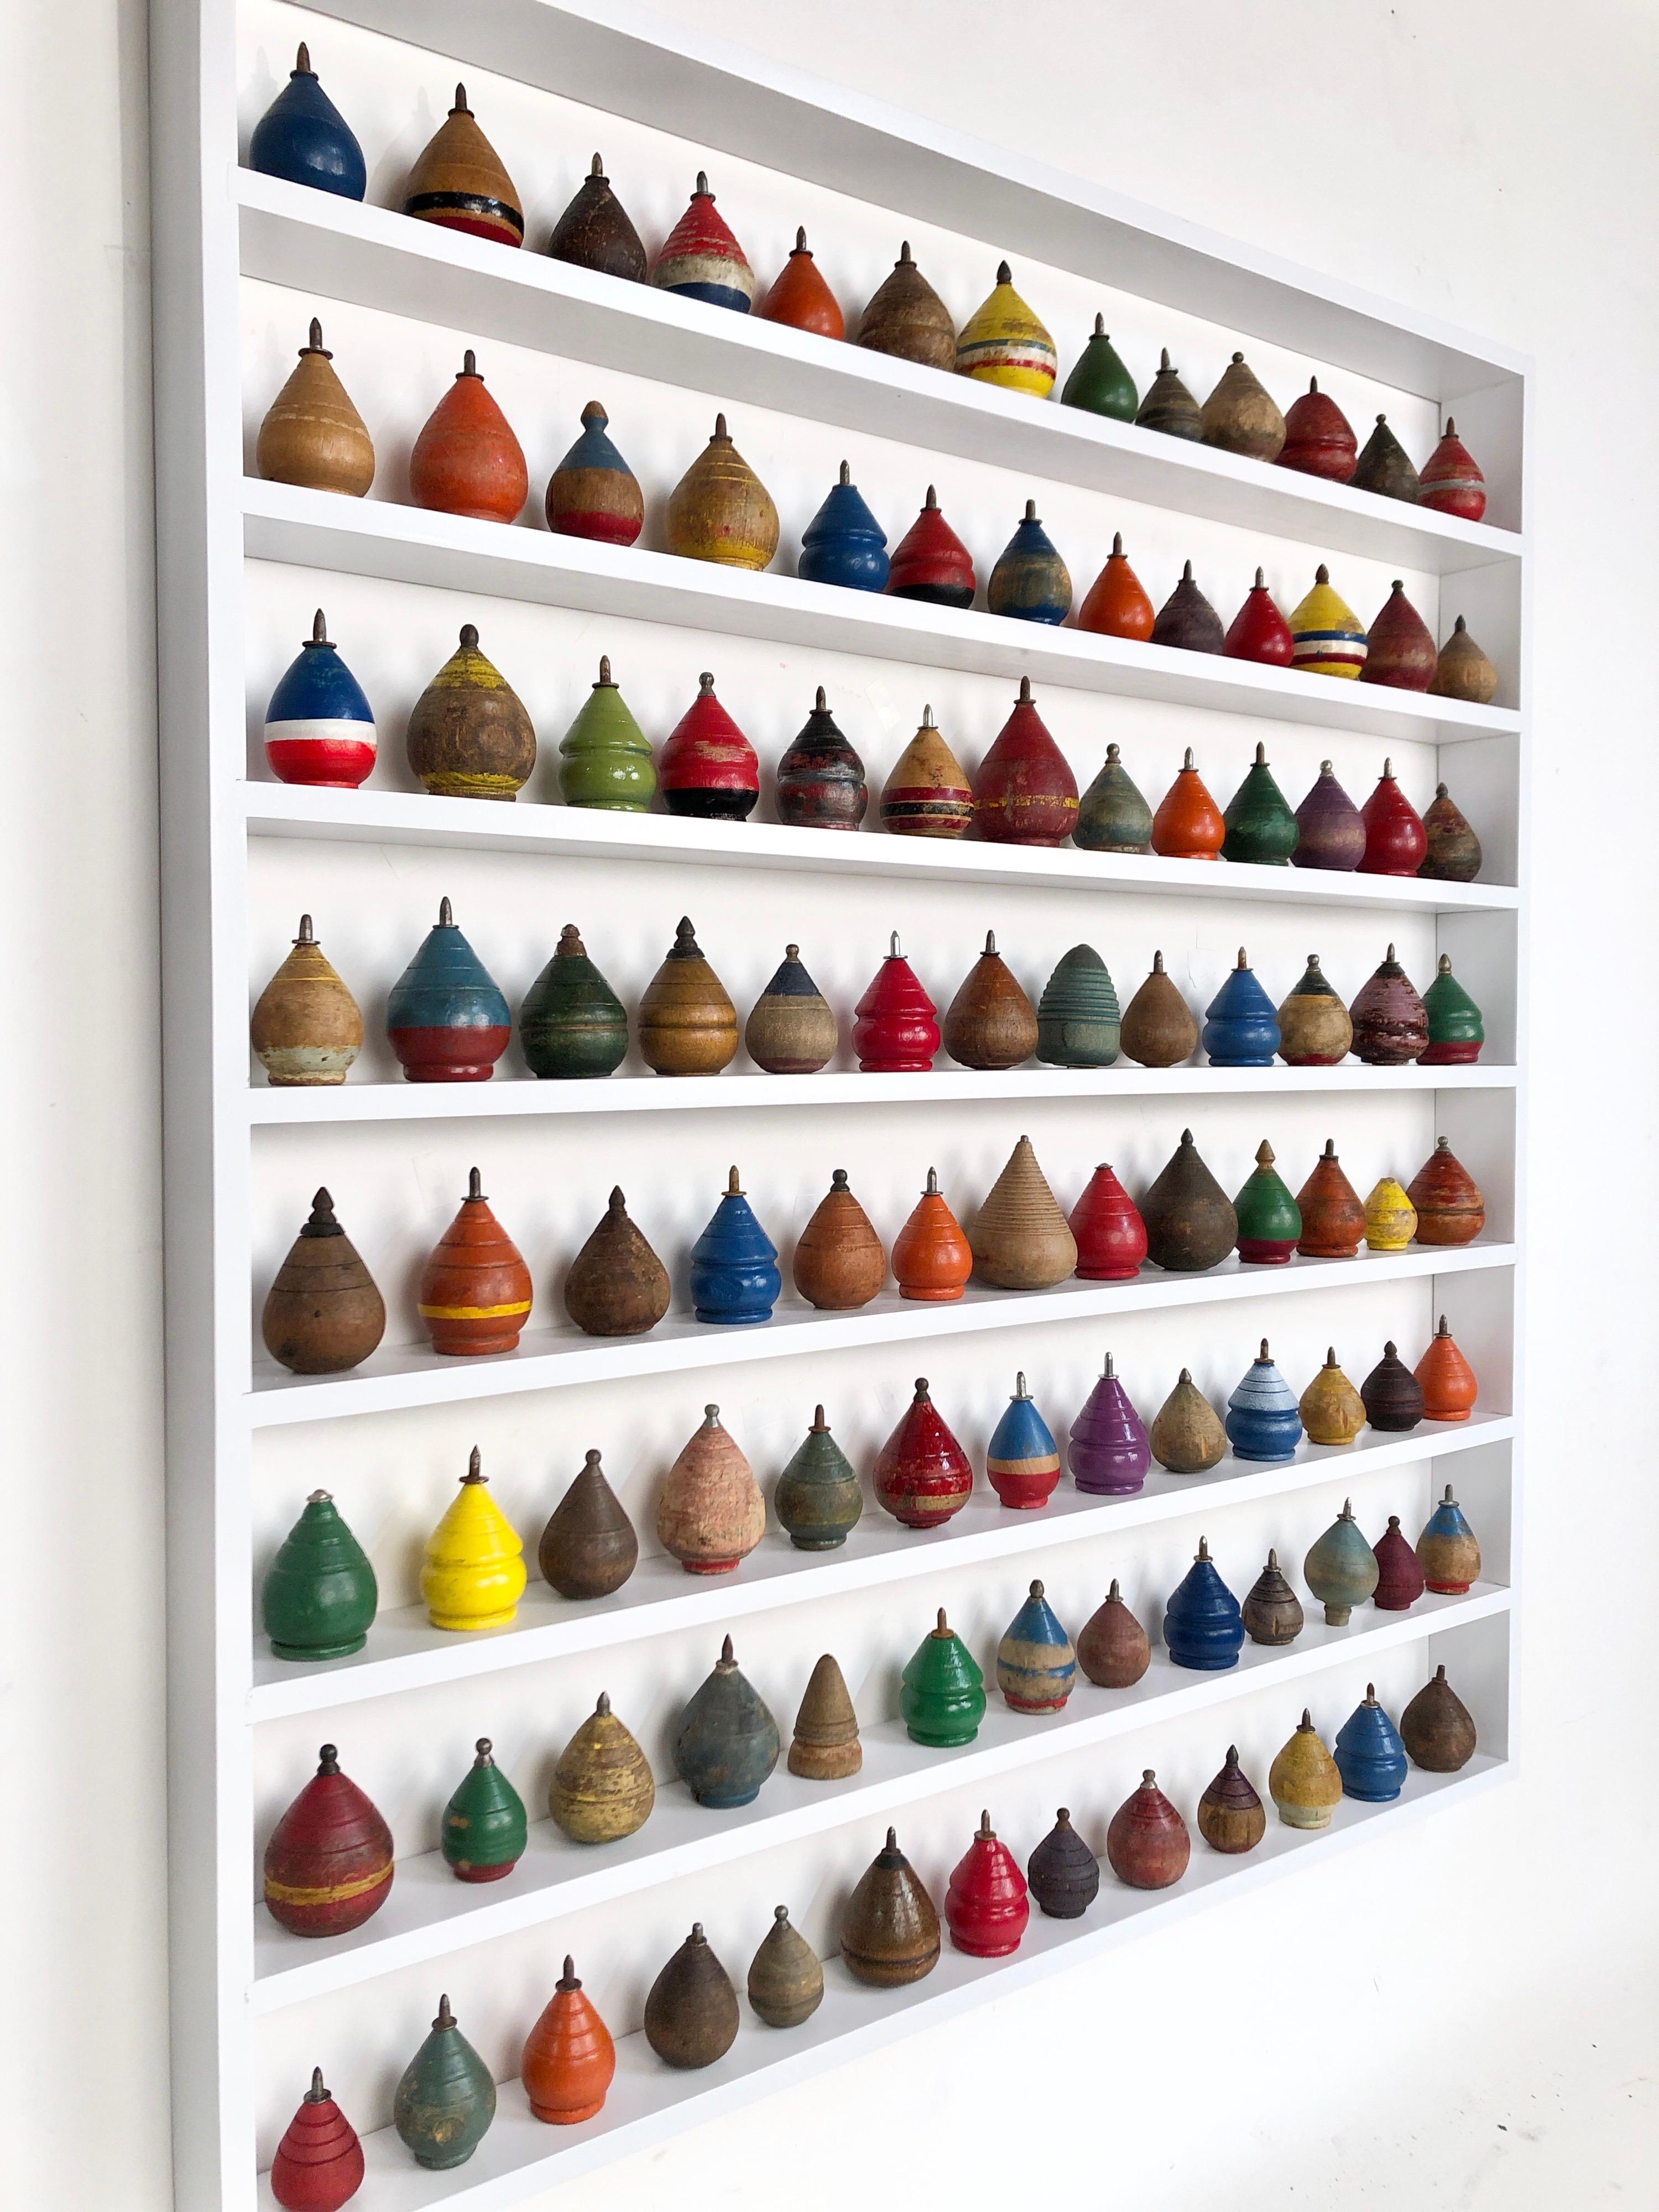 A custom built white painted maple shadow box containing 104 antique wooden spinning tops of various shapes, colors and sizes. Can be arranged any way you like. These antique spinning tops are circa 1890-1950. The custom built frame is 30